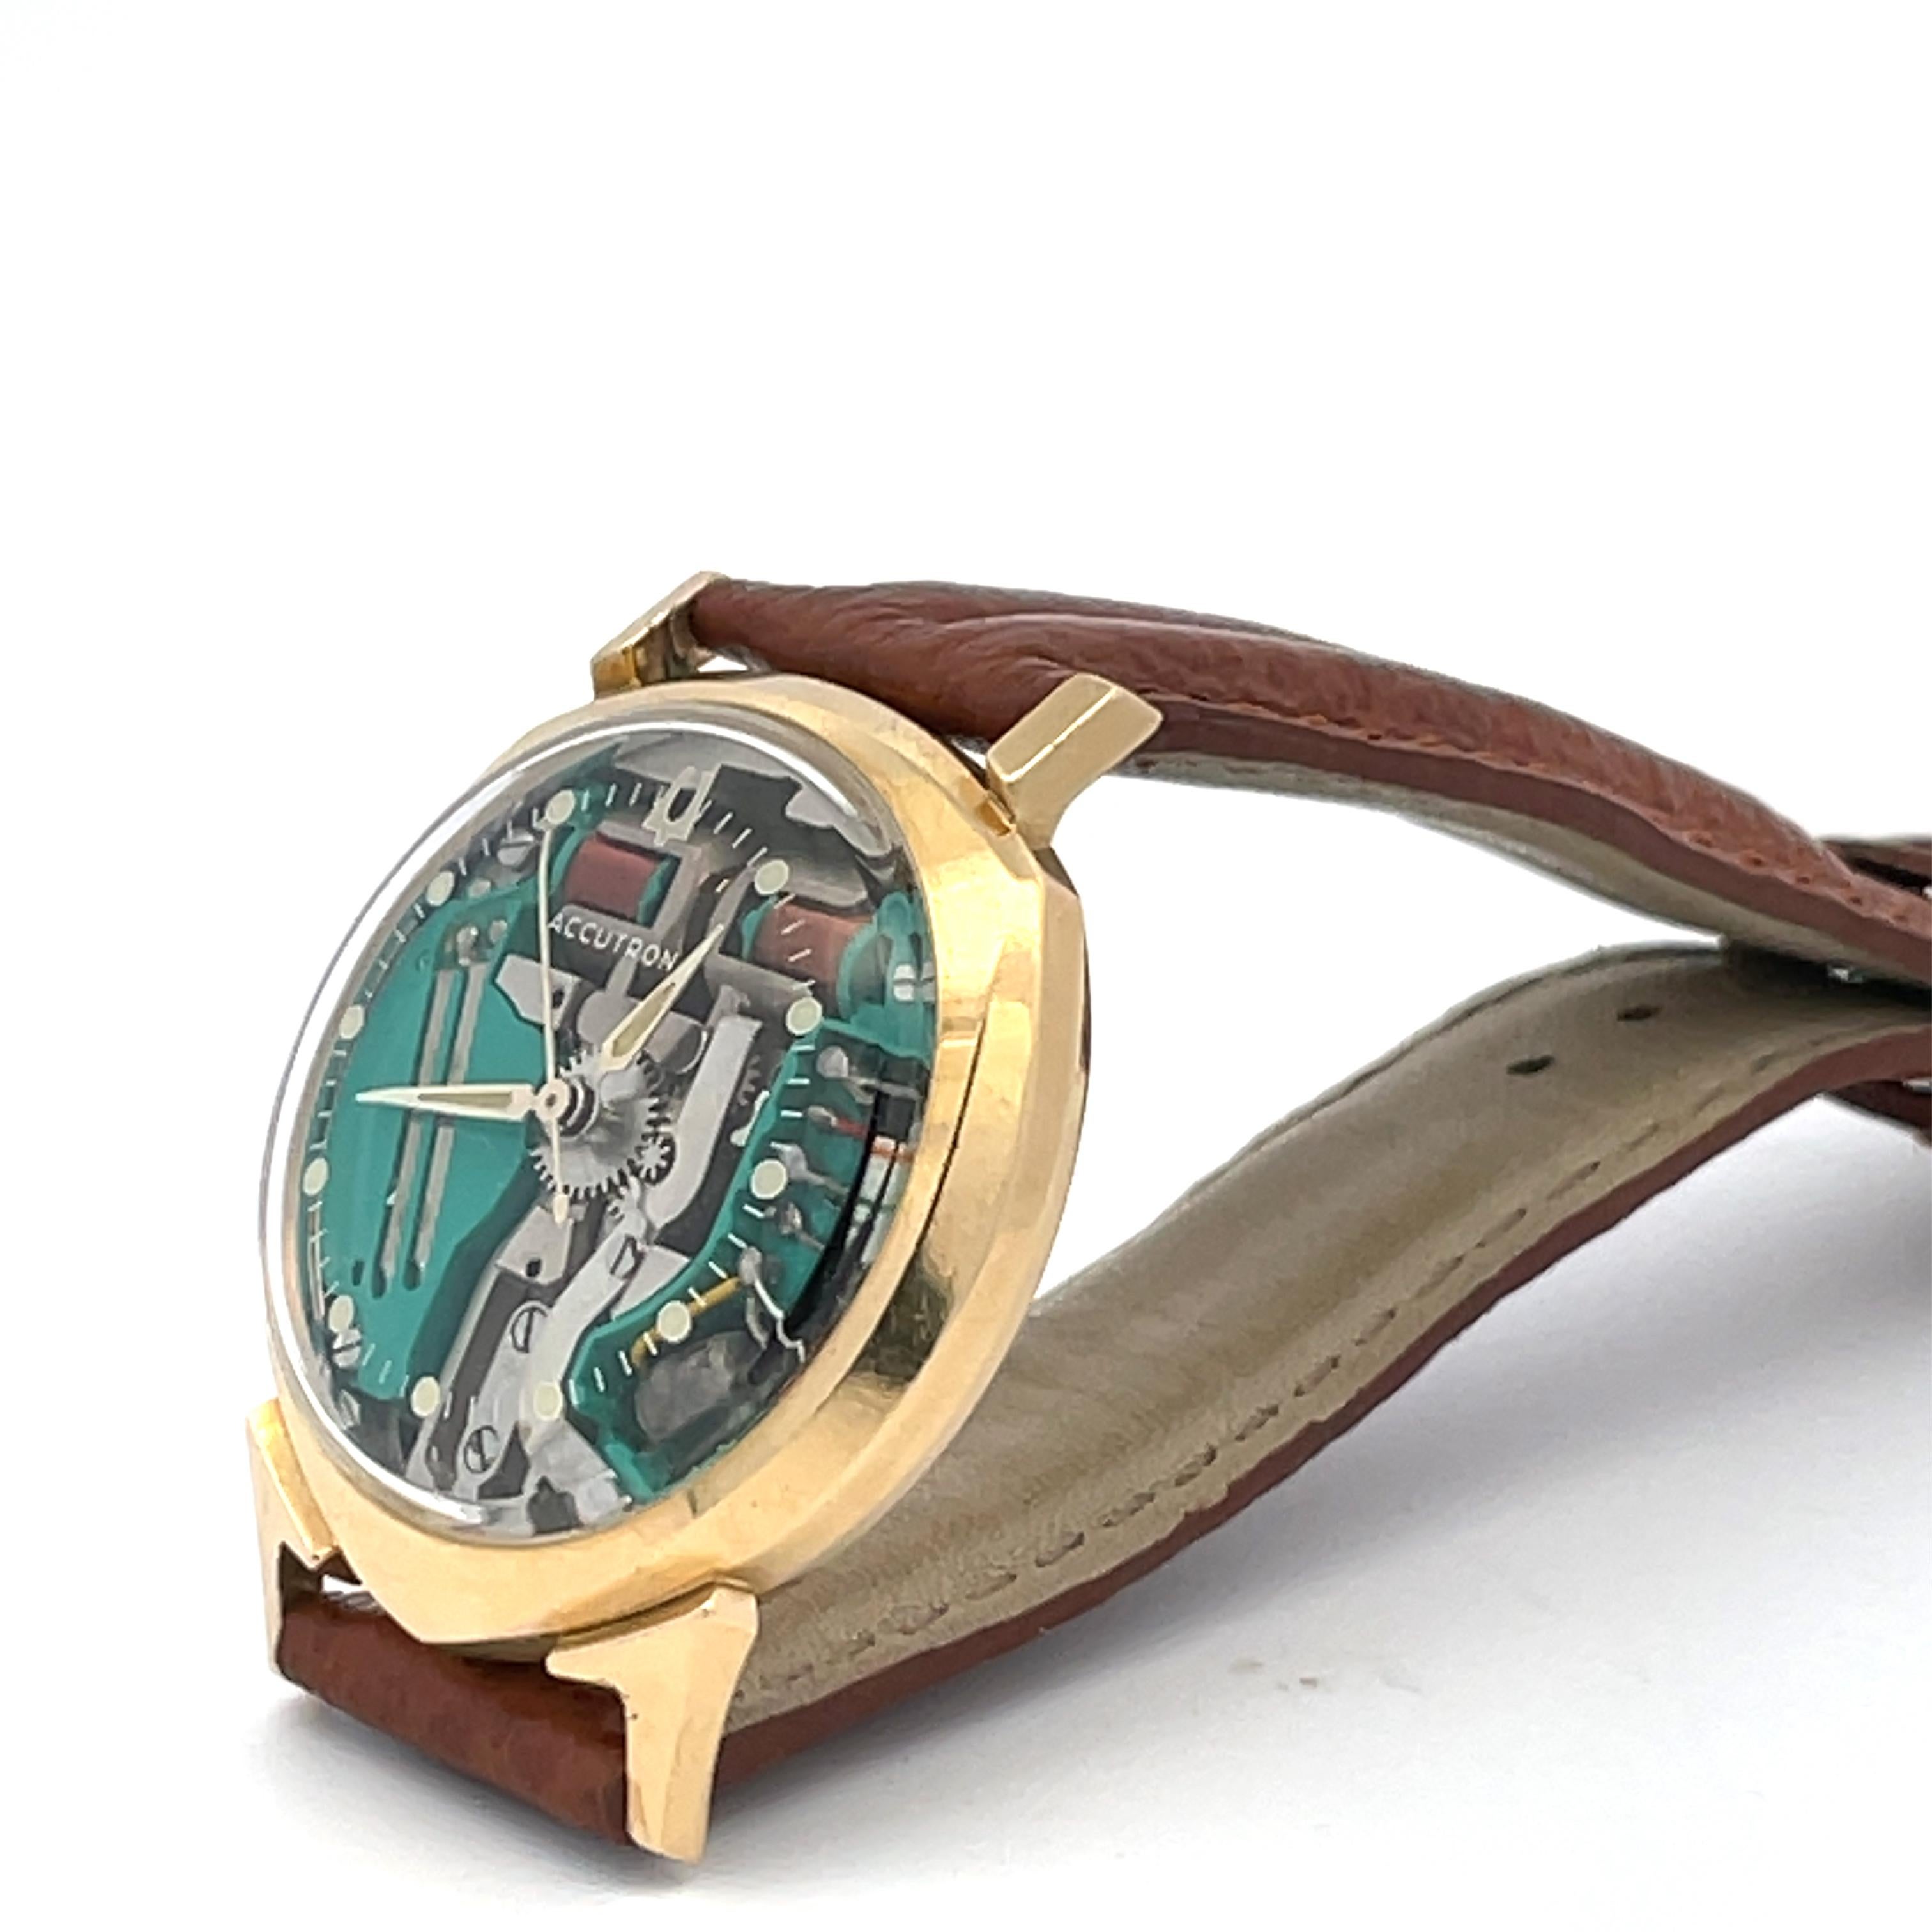 Extremely rare 14K solid yellow gold vintage Bulova Accutron asymmetrical Spaceview ‘Alpha’, dated 1961, with the shield-shape case, and signature visible jade movement. The electro-mechanical battery powered movement, pioneered by Bulova, is in